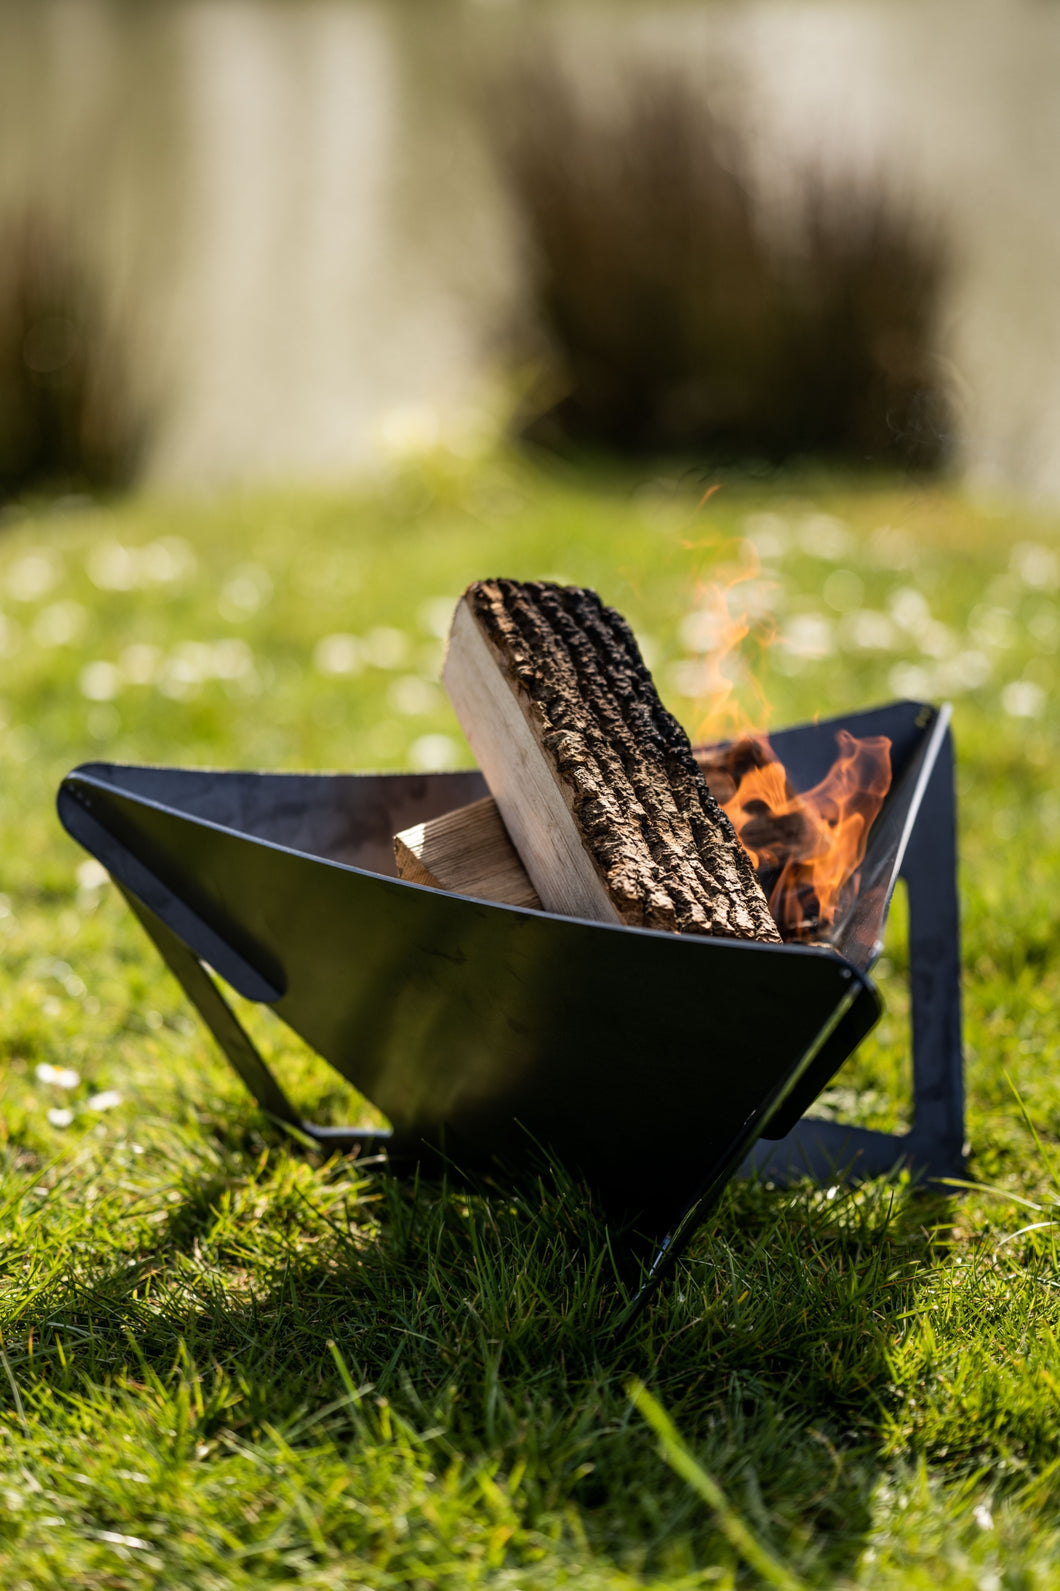 Arada Fire Pit | Outdoor Stove Fire Pit